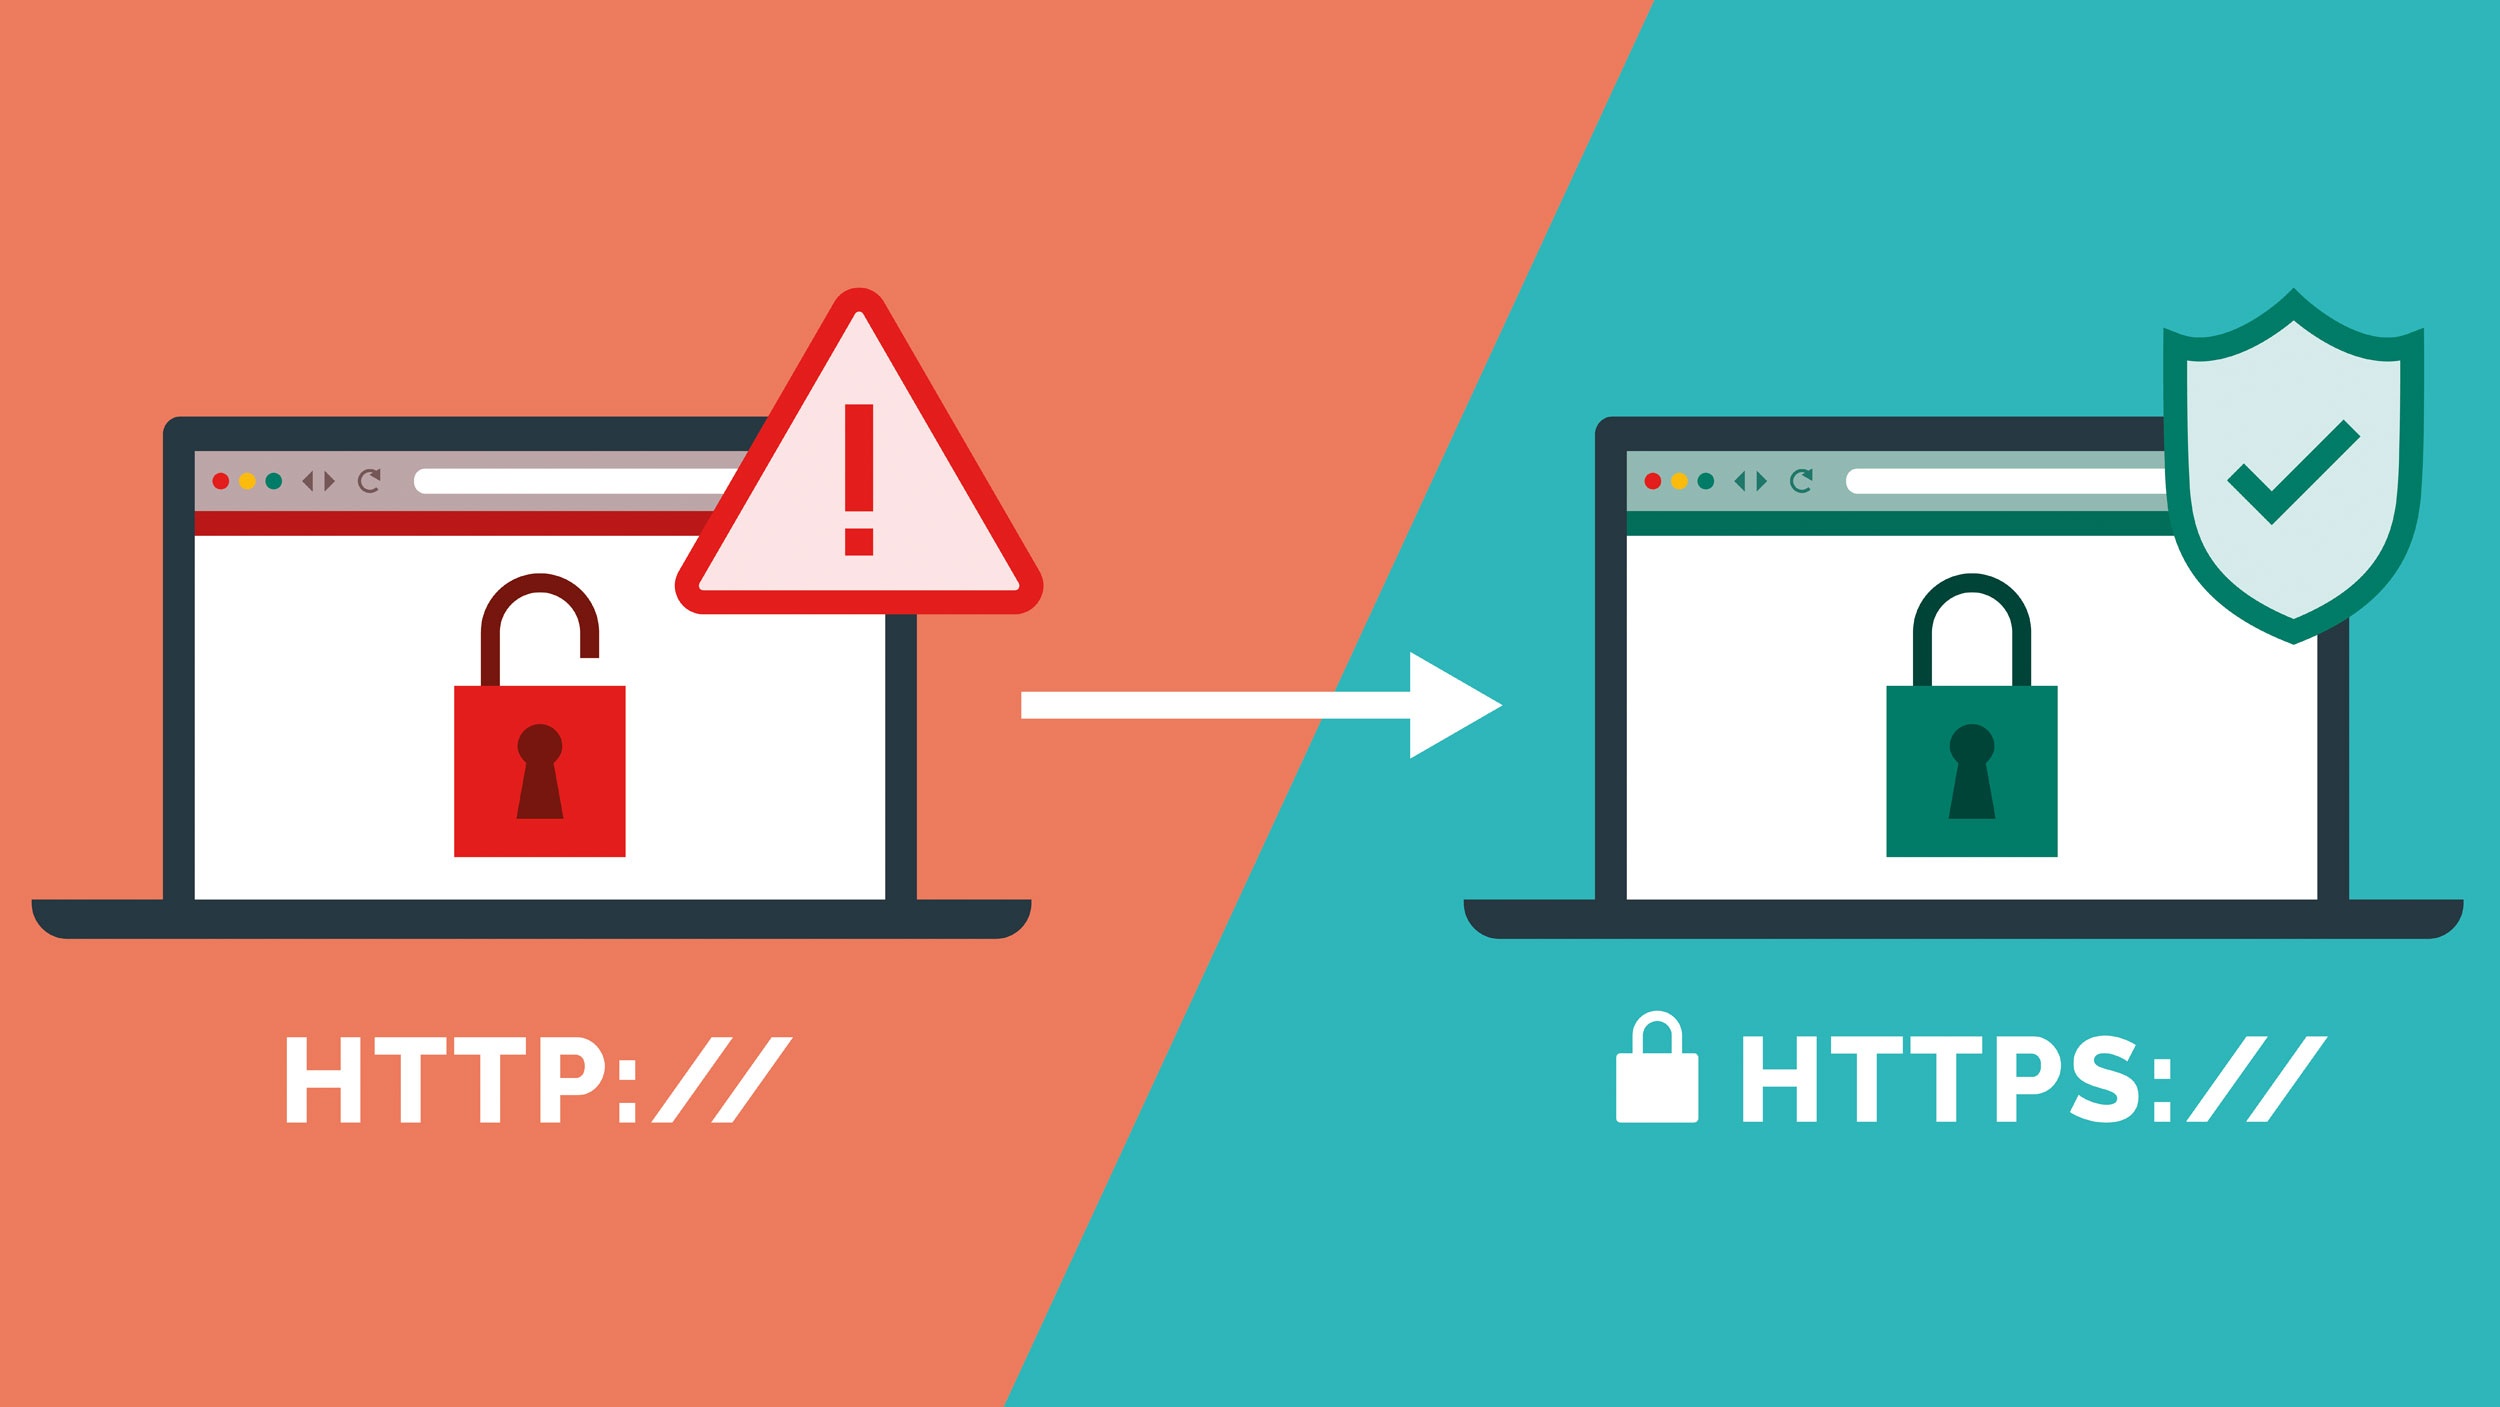 Graphic with laptops with and without SSL certificate and HTTPS Need for relaunch